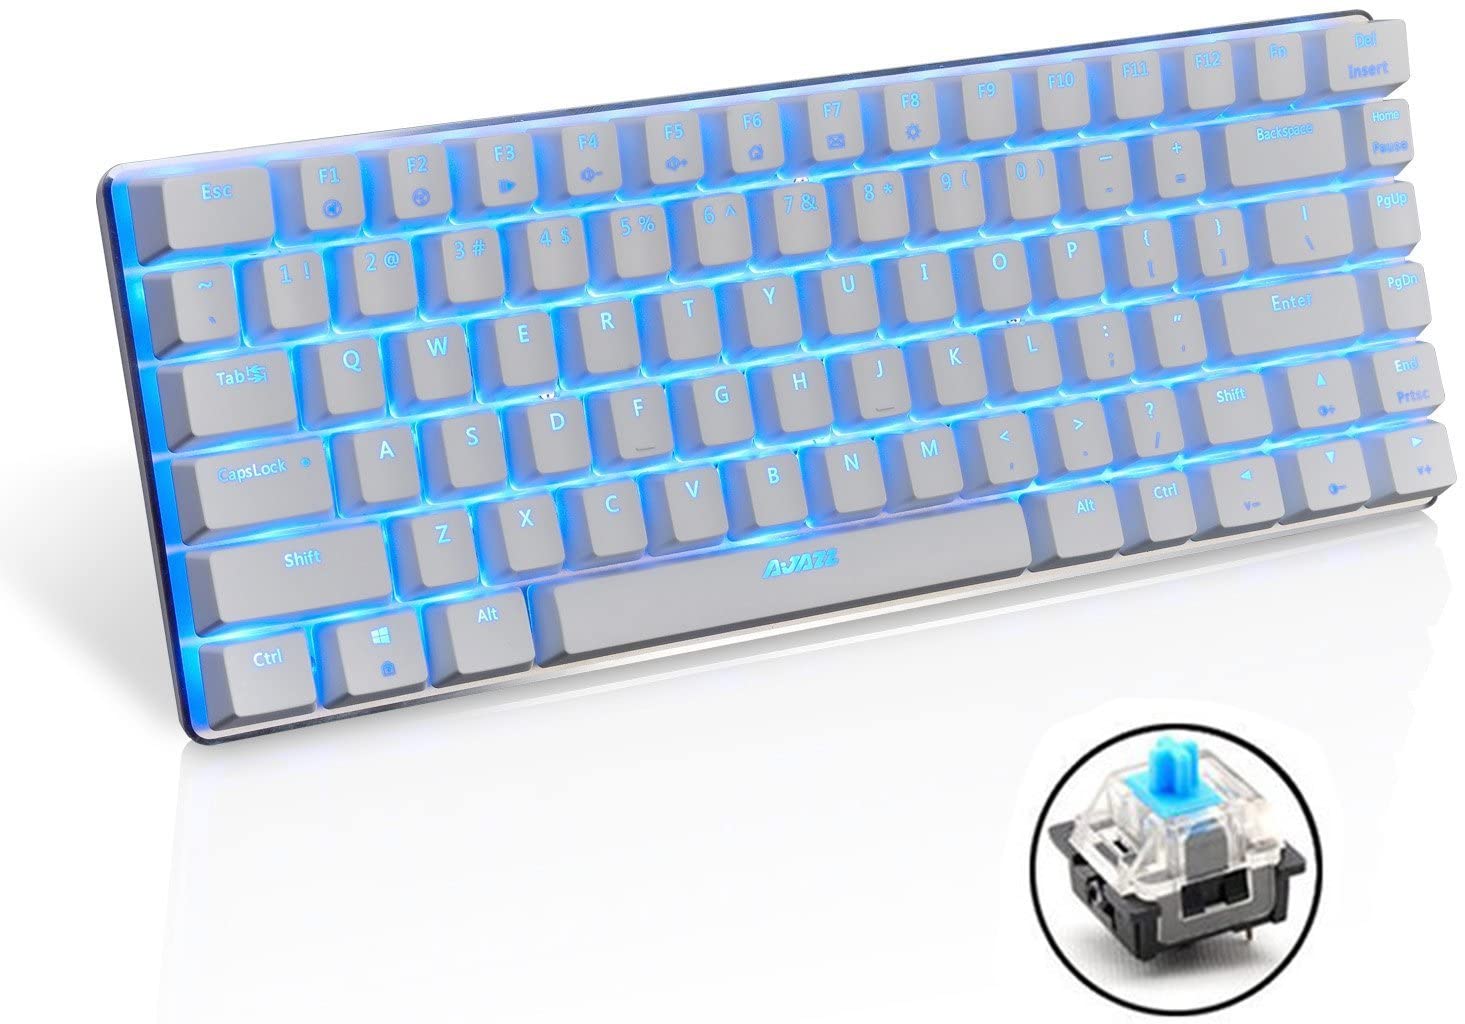 UrChoiceLtd® Ajazz Geek AK33 Backlit Usb Wired Gaming Mechanical Keyboard Blue Black Switches for Office, Typists and Play Games (Blue Switch, White)